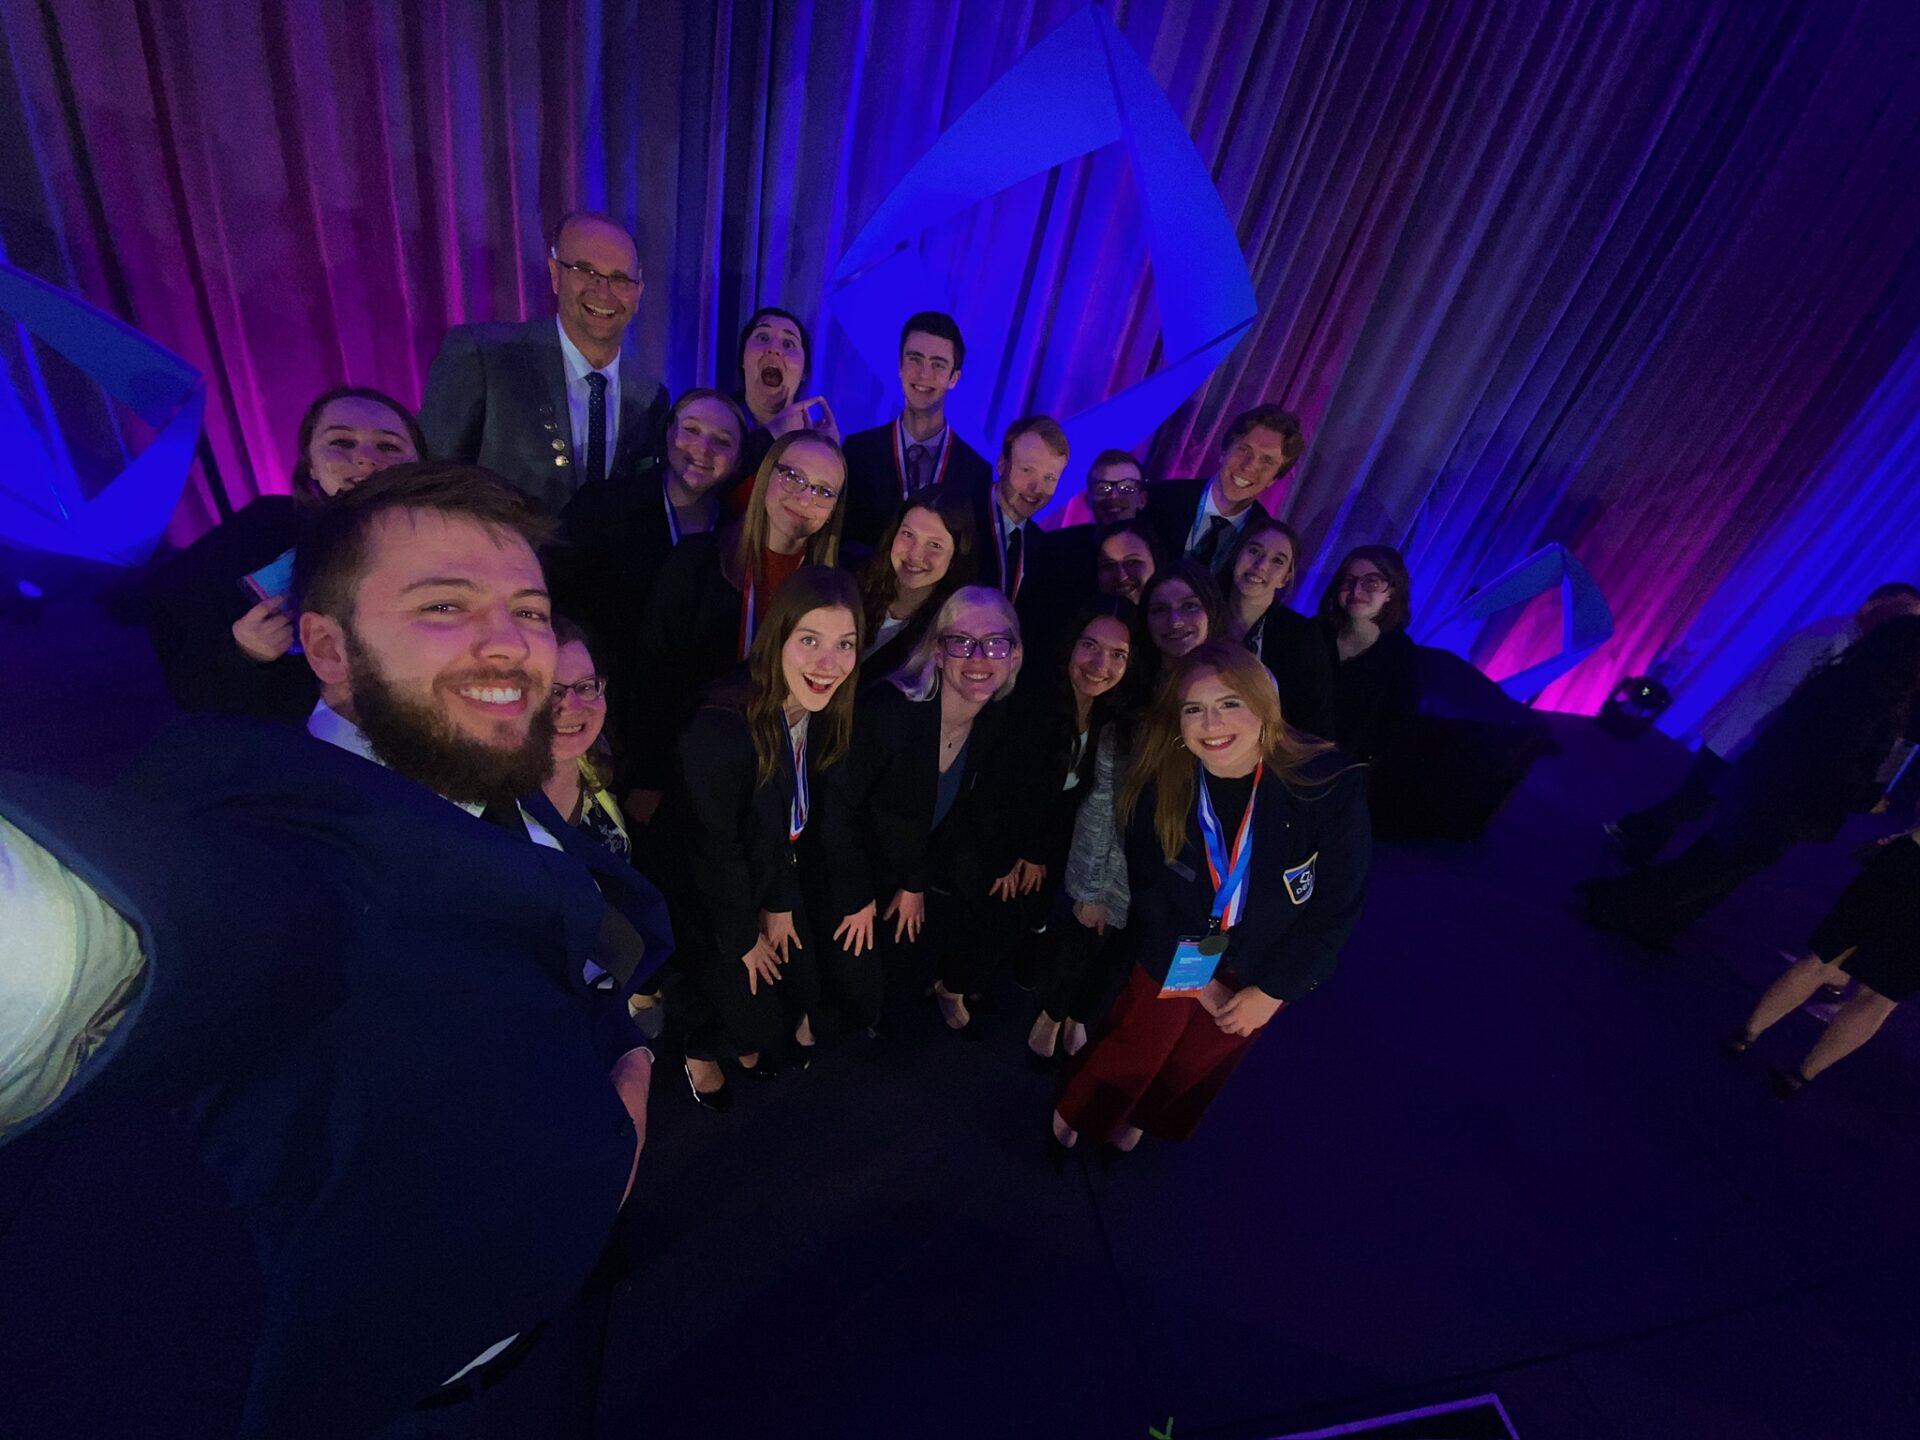 Nine MSUM students place in the Top 10 at international DECA competition